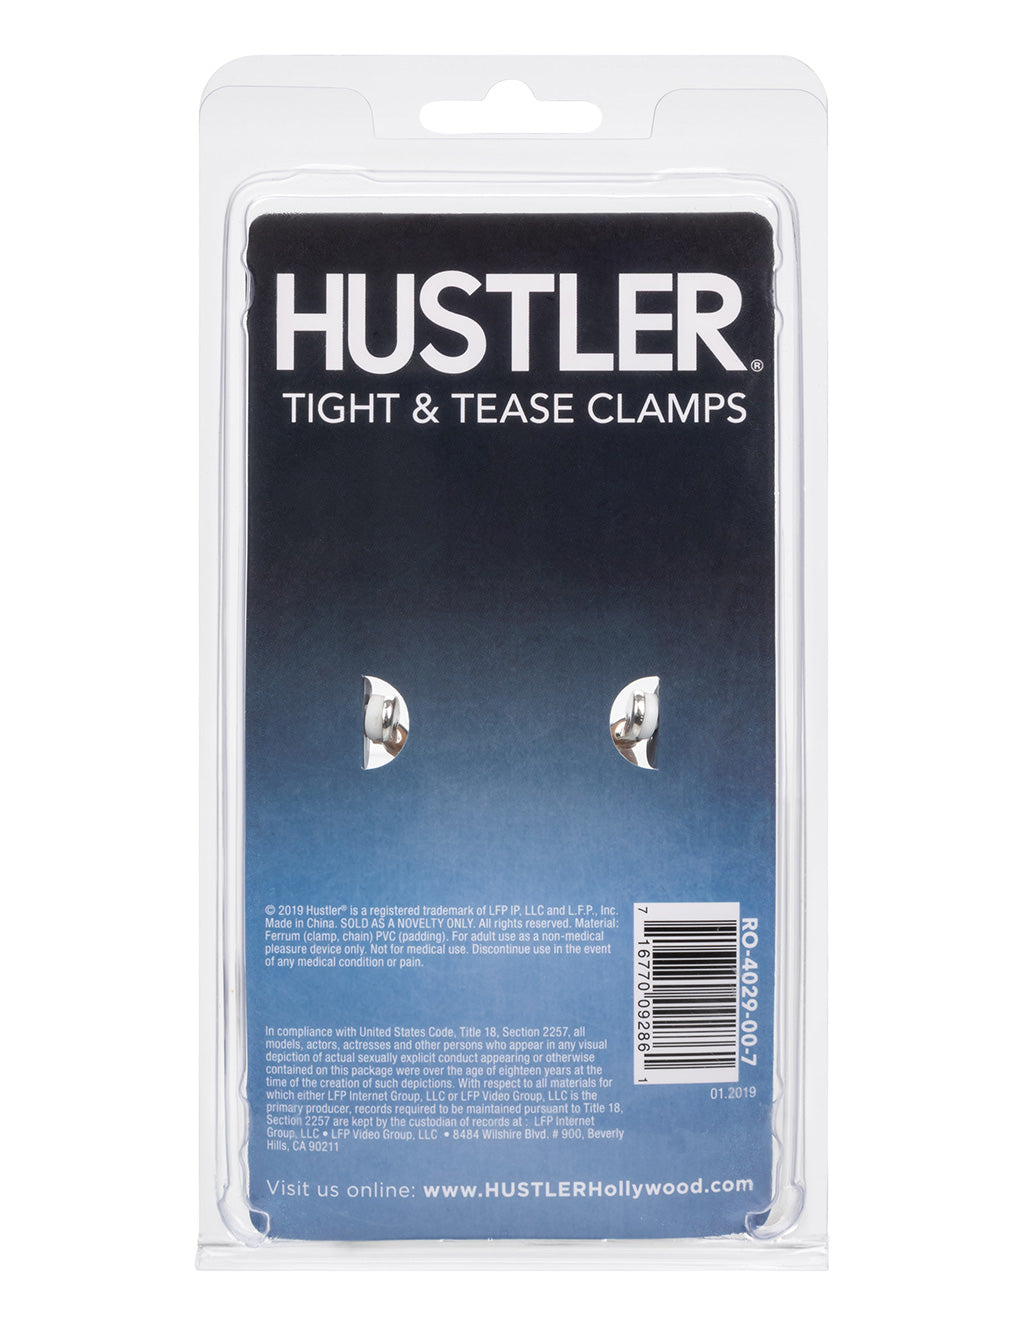 Hustler® Tight & Tease Clamps- Back package